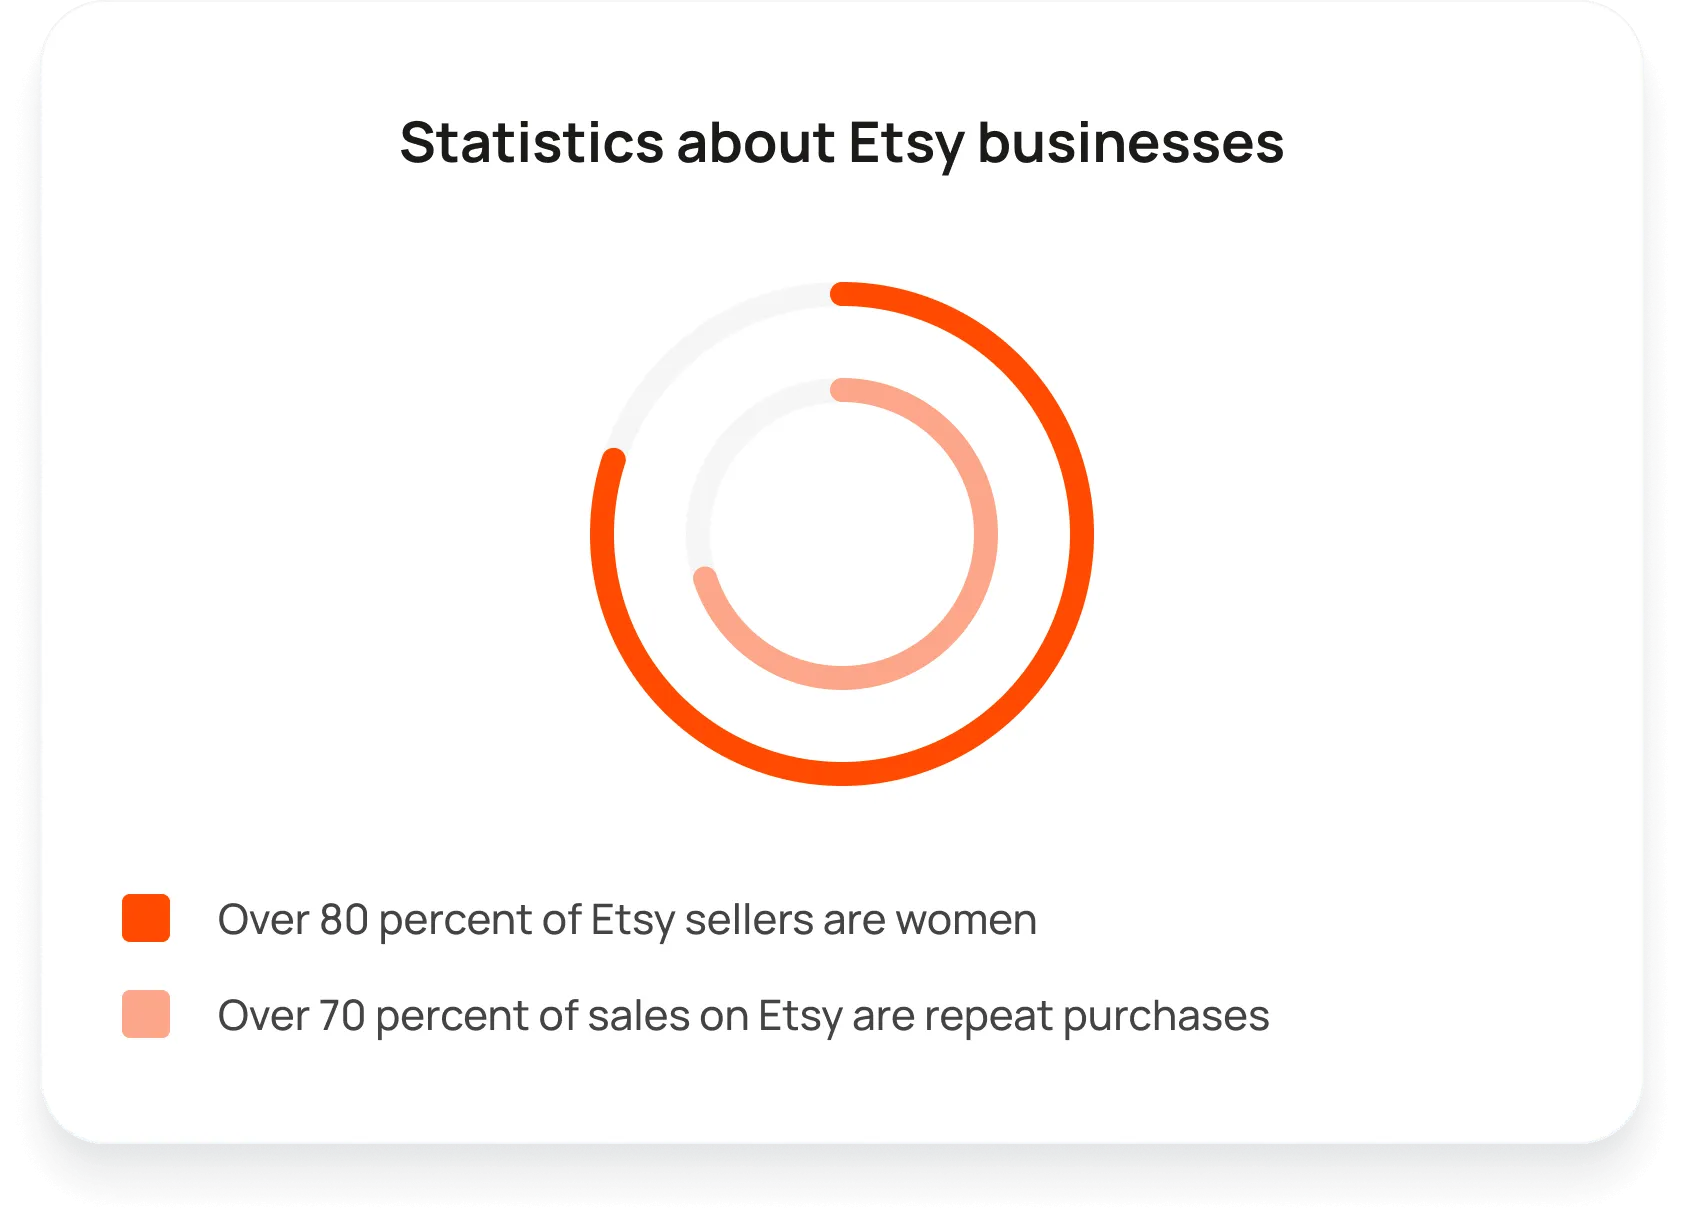 Chart showing statistics about Etsy businesses - Over 80 percent of Etsy sellers are women - Over 70 percent of sales on Etsy are repeat purchases